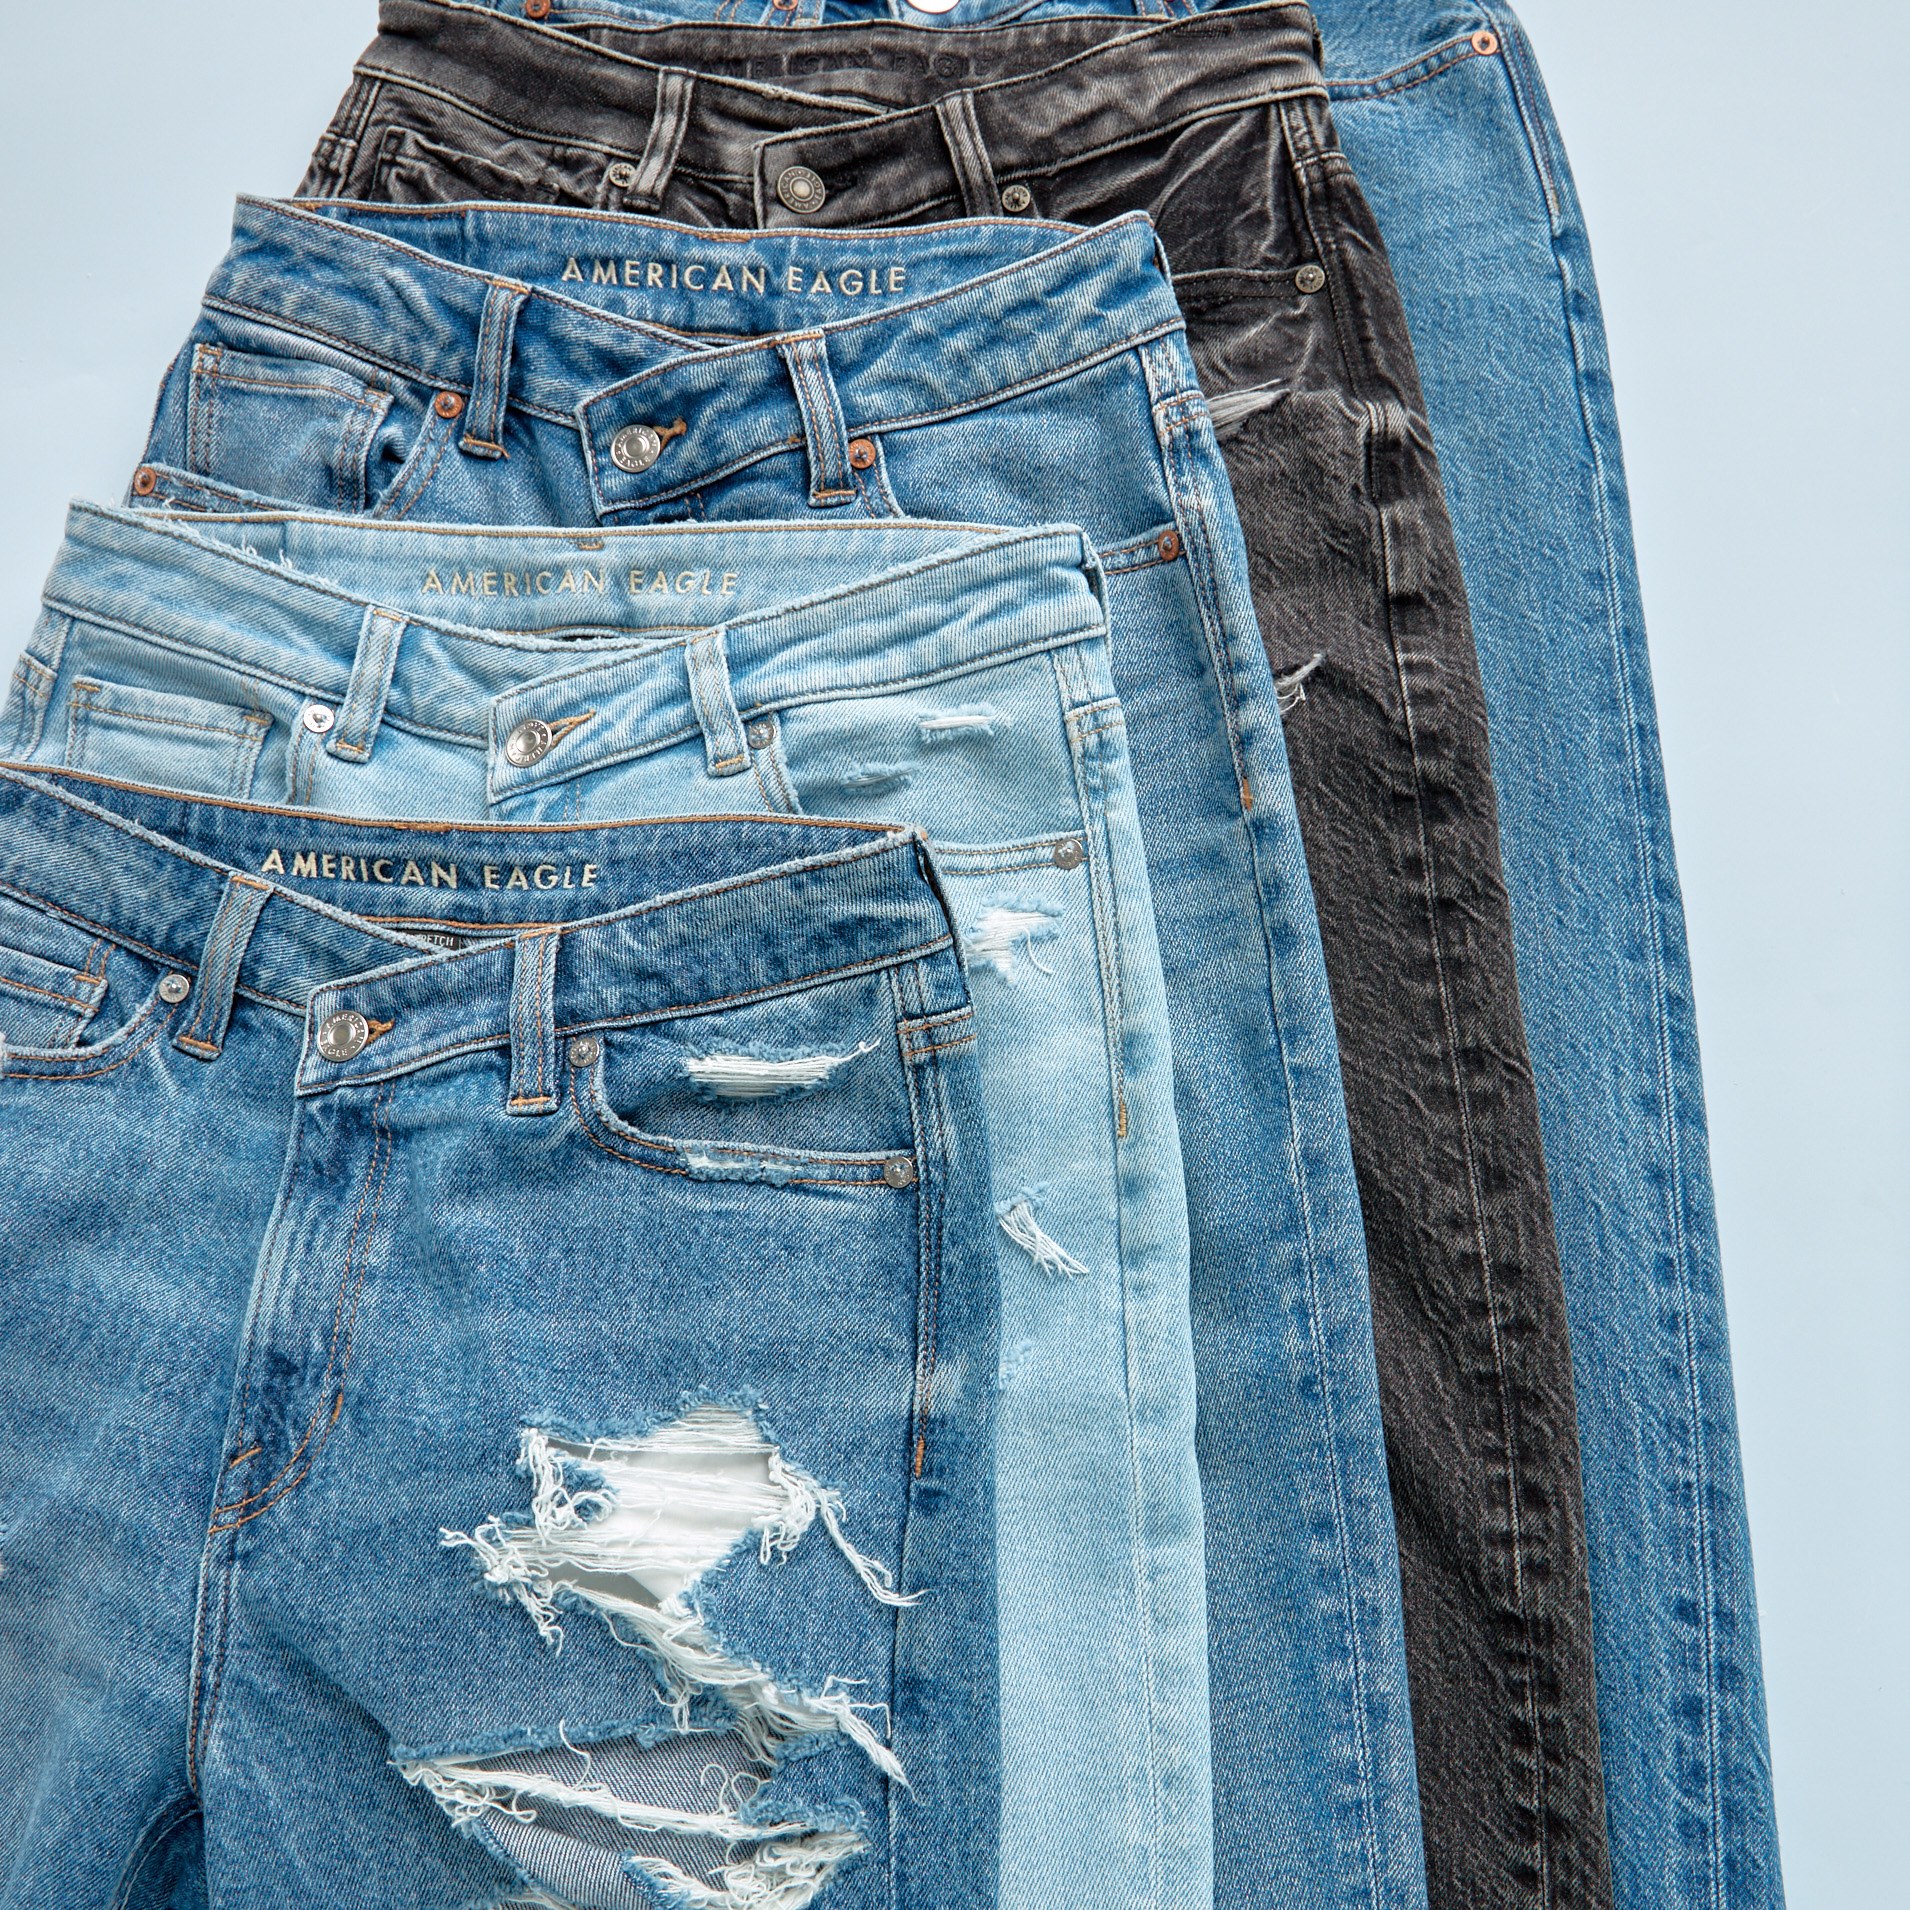 Image of five pairs of jeans layered neatly on top of each other on a slight angle. The first three pairs (starting from bottom) are in various shades of blue and show some distressing, the fourth pair is black and the last pair is blue.